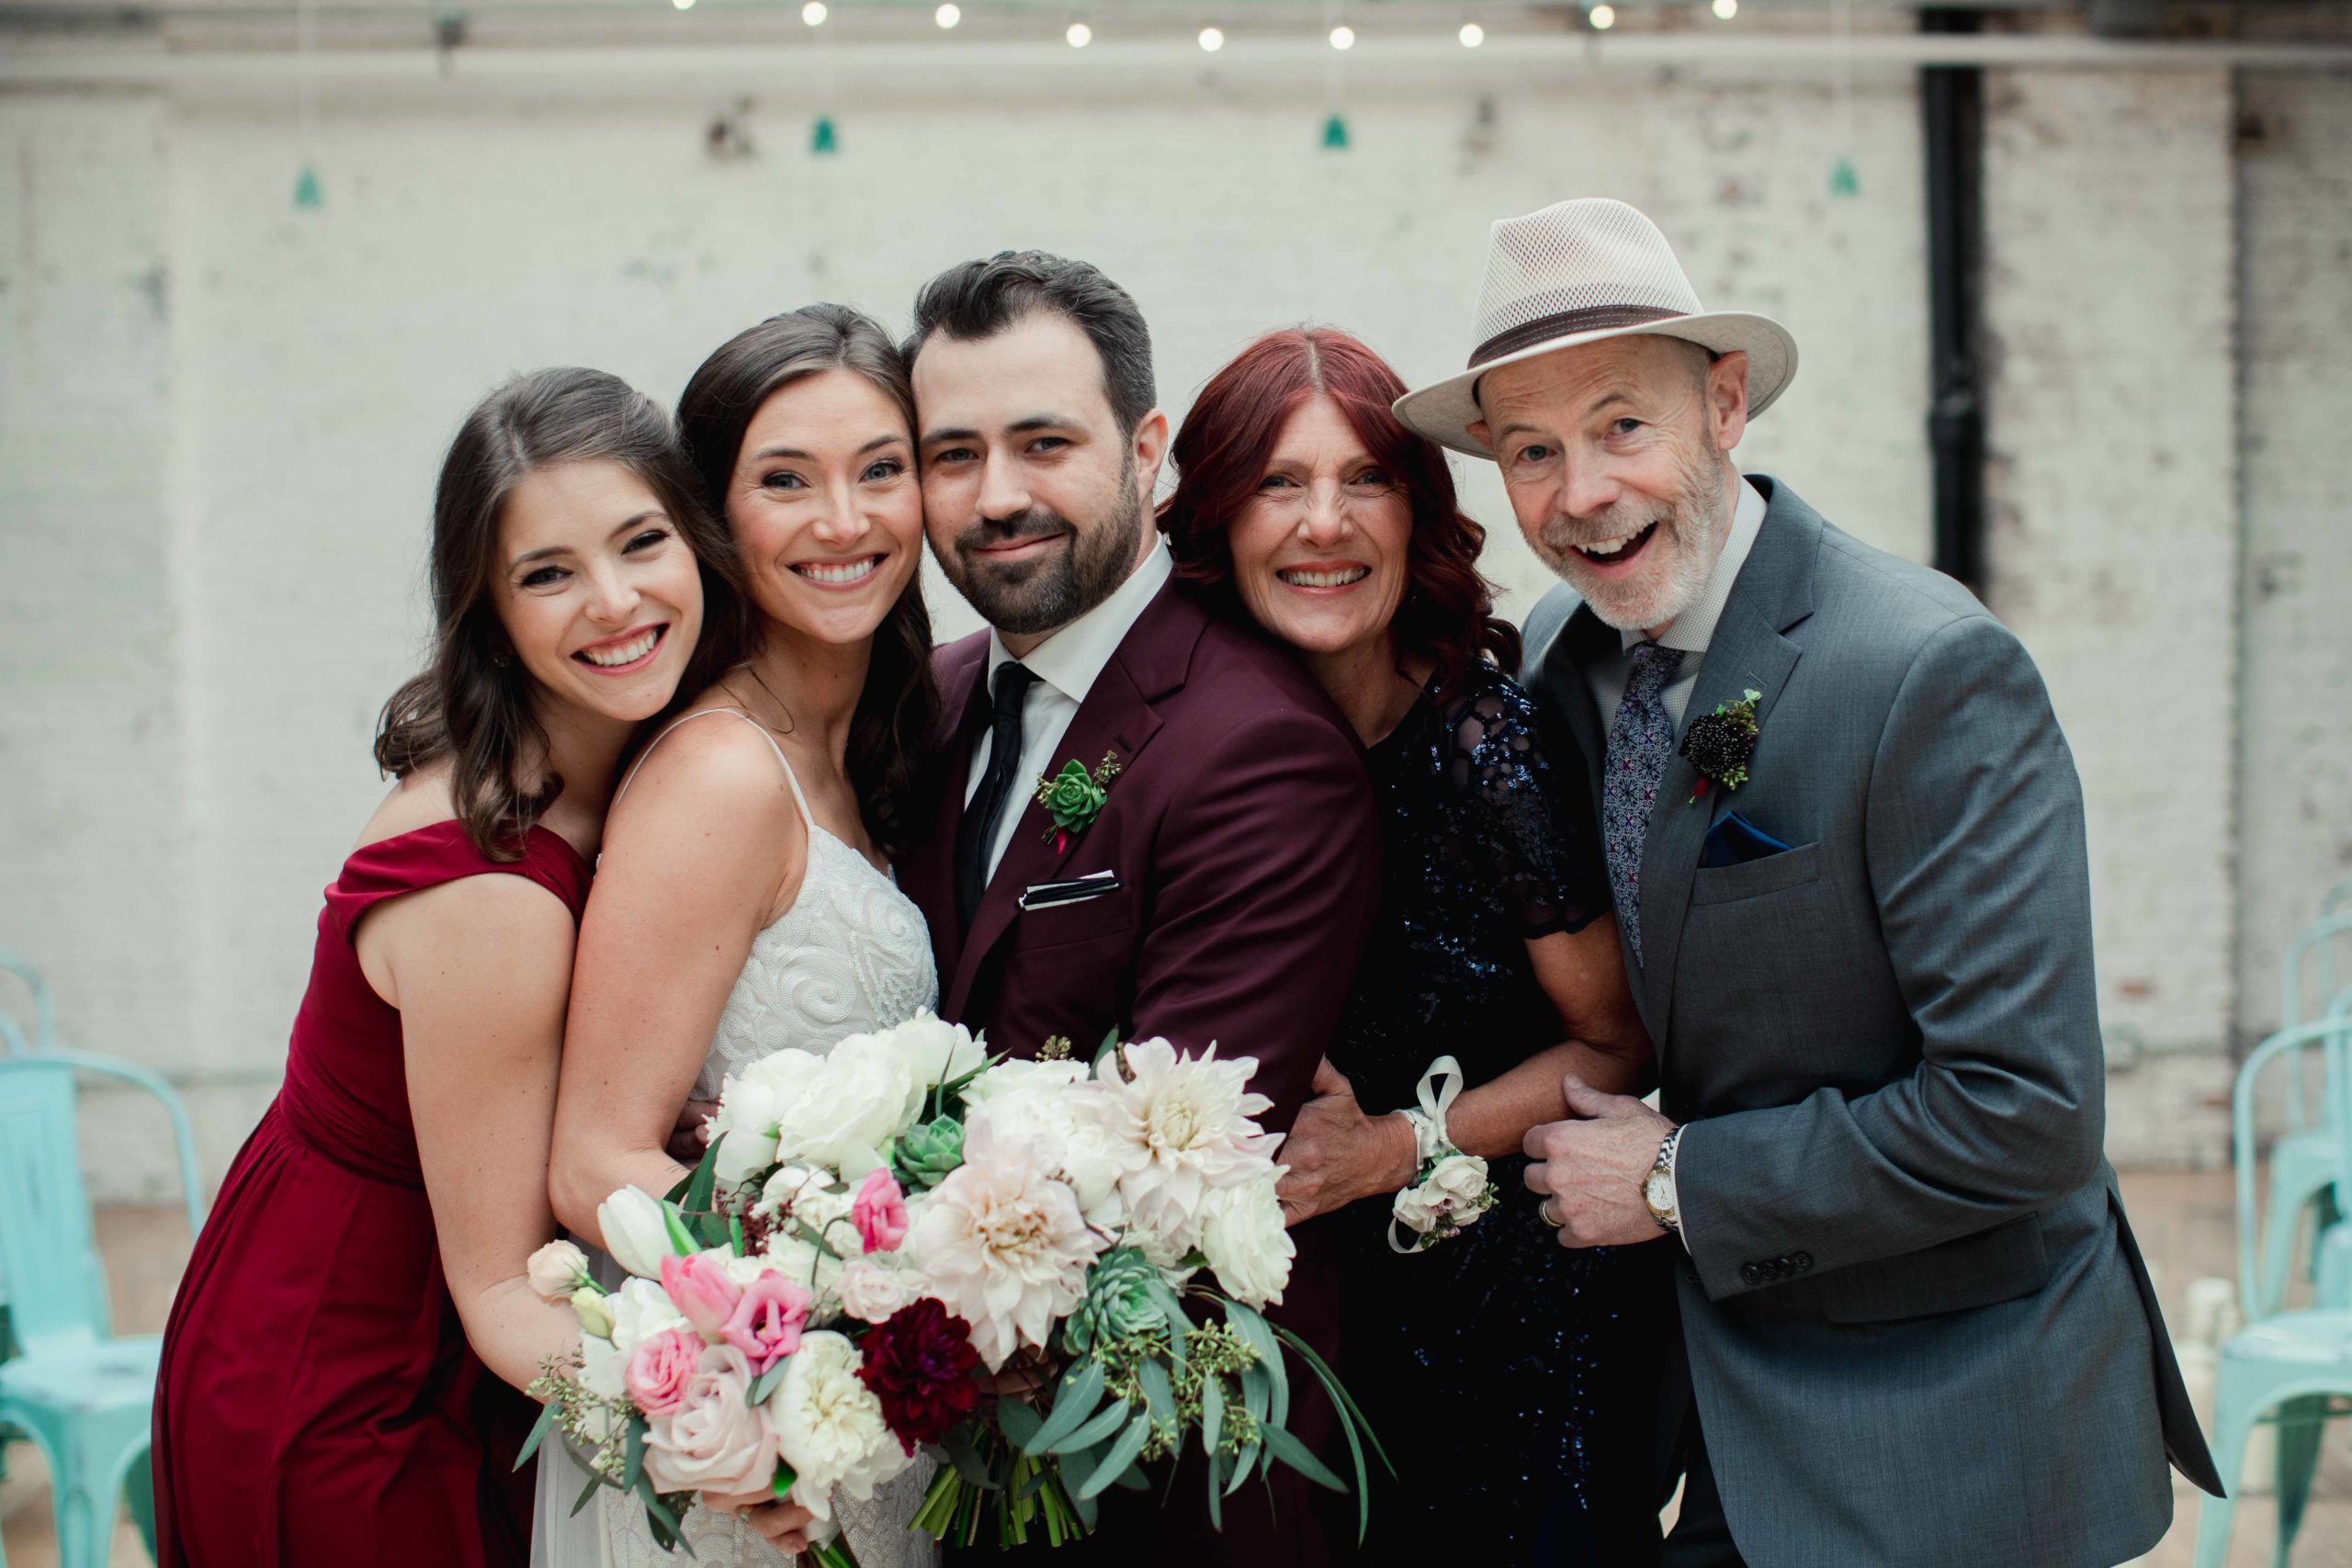 Chicago Illinois Wedding Photography Family Portrait at the Joinery